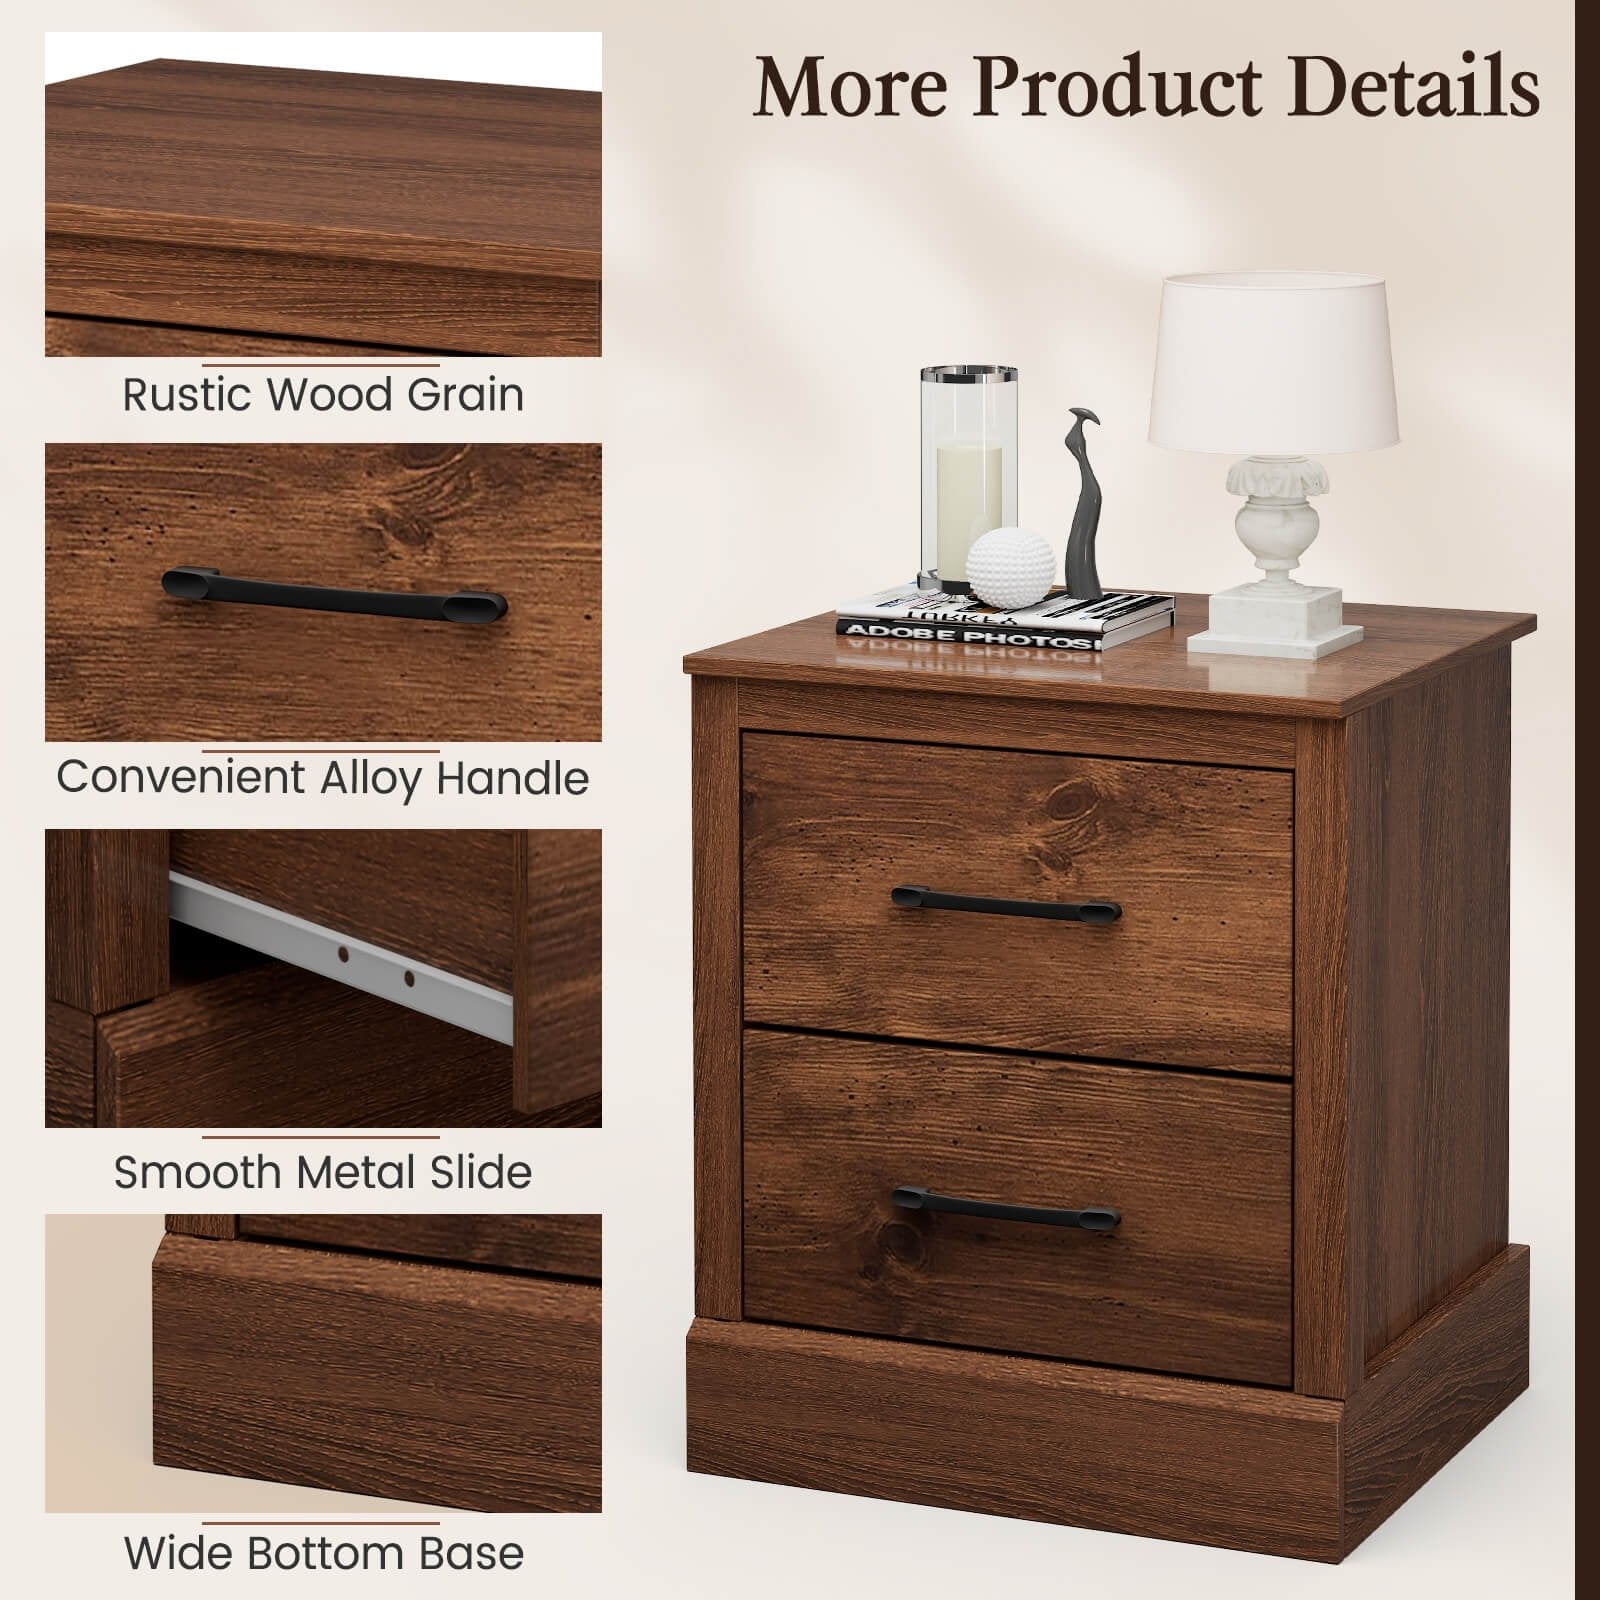 Wood Compact Floor Nightstand with Storage Drawers, Rustic Brown - Gallery Canada